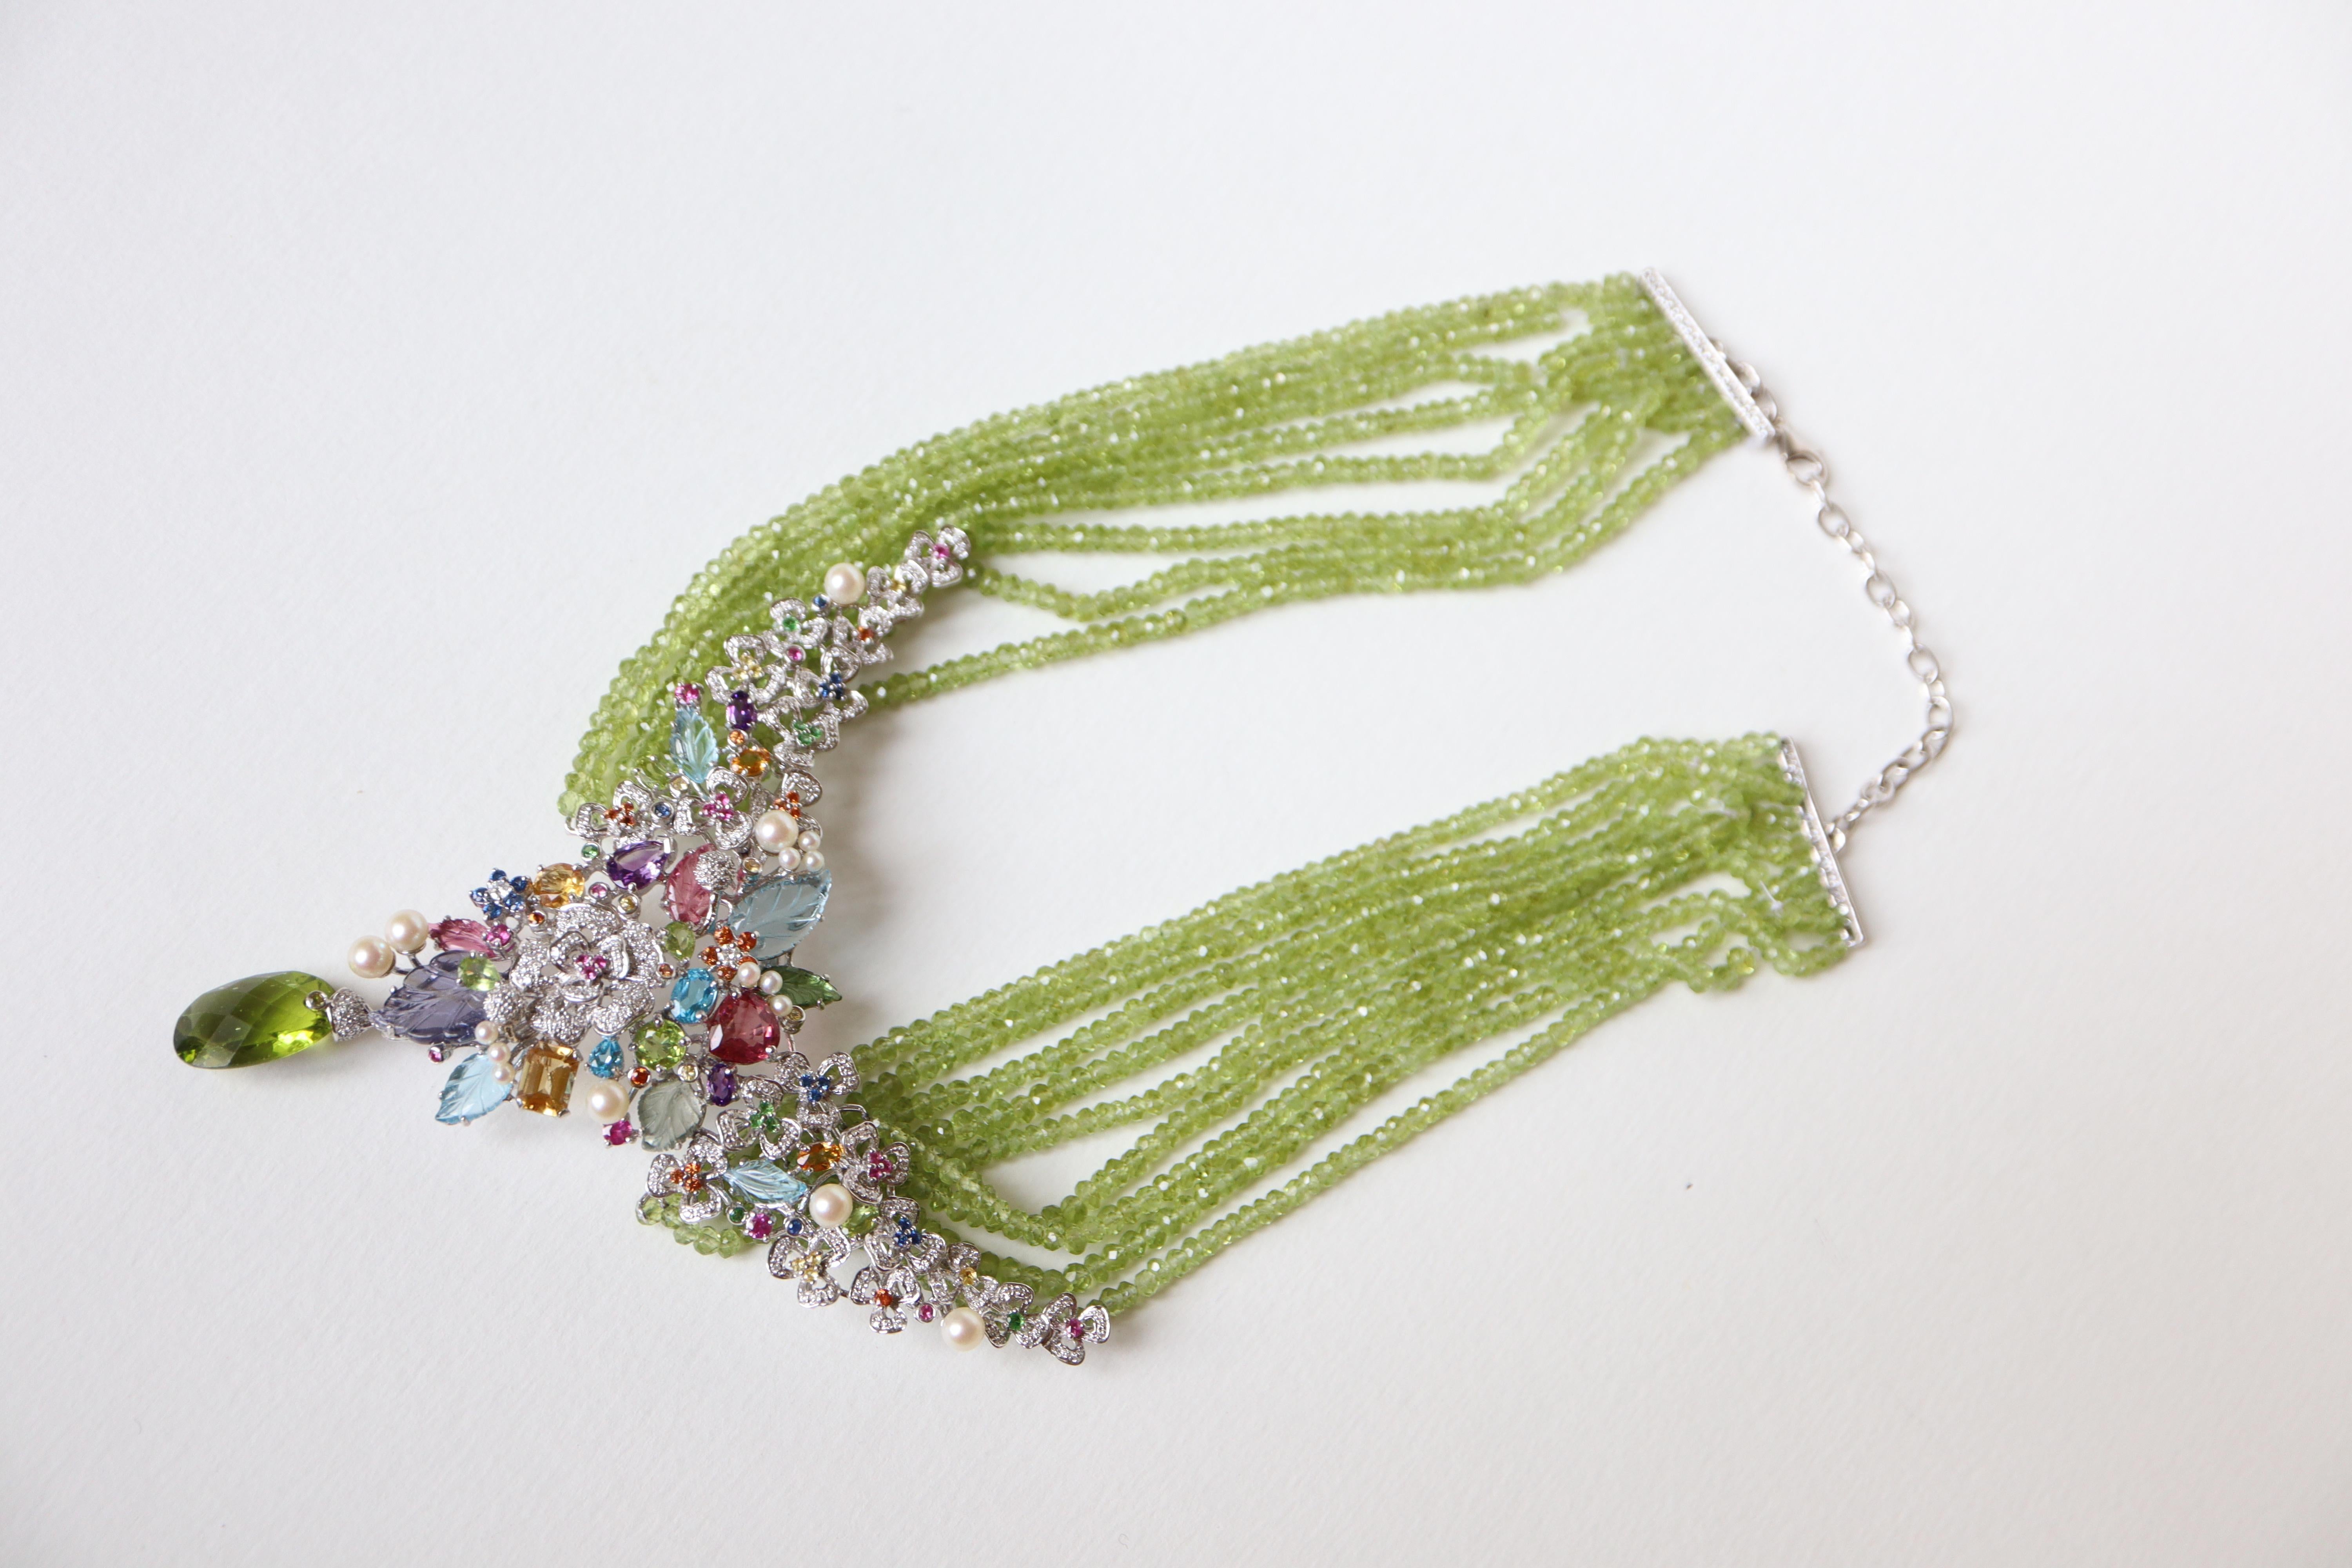 Tutti Frutti necklace in 18 kt white gold, diamonds, fine stones and quartz pearls.
Central Tutti Frutti motif retained by 8 rows of faceted green quartz beads attached to two white gold bars paved with diamonds. These bars held by two chains with